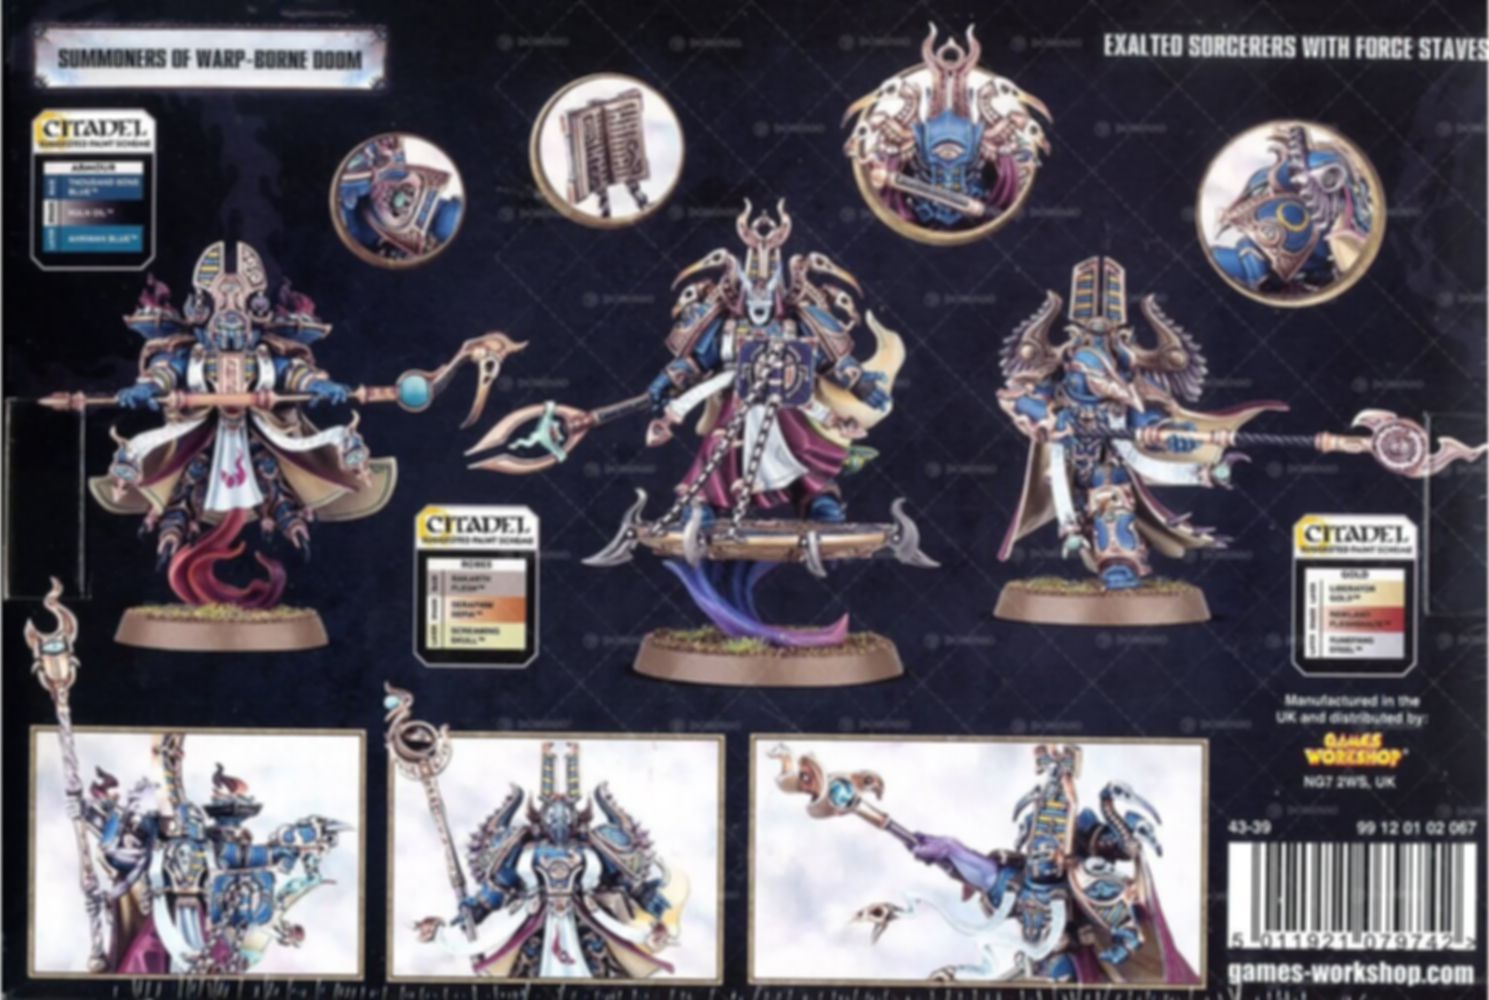 Warhammer 40,000 Chaos Heretic Astartes Thousand Sons: Exalted Sorcerers parte posterior de la caja